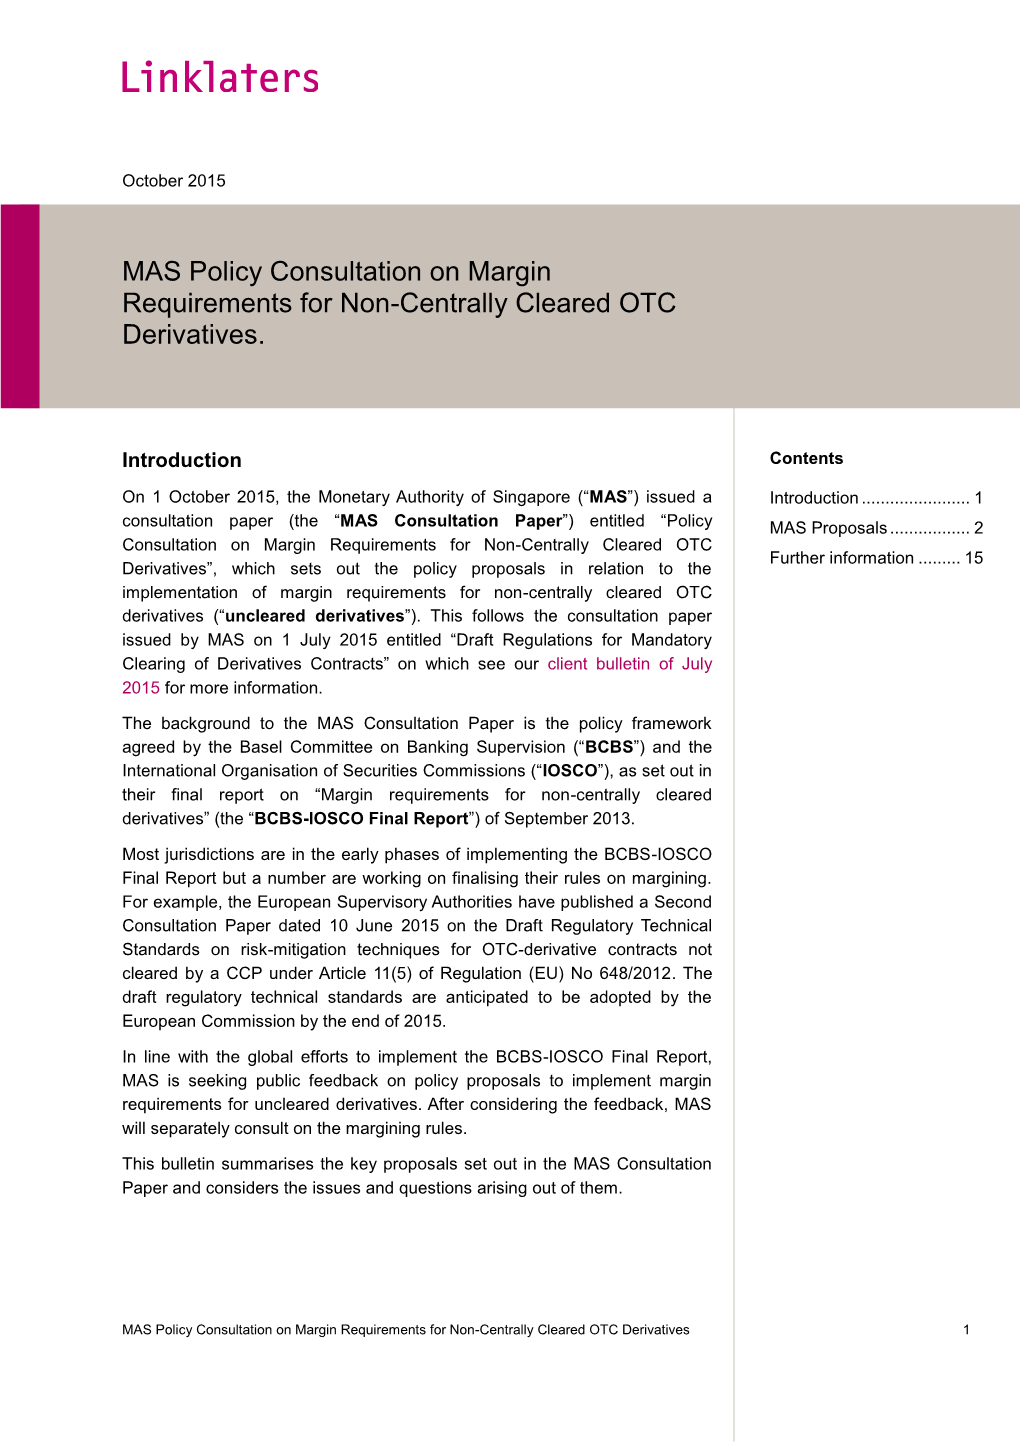 MAS Policy Consultation on Margin Requirements for Non-Centrally Cleared OTC Derivatives